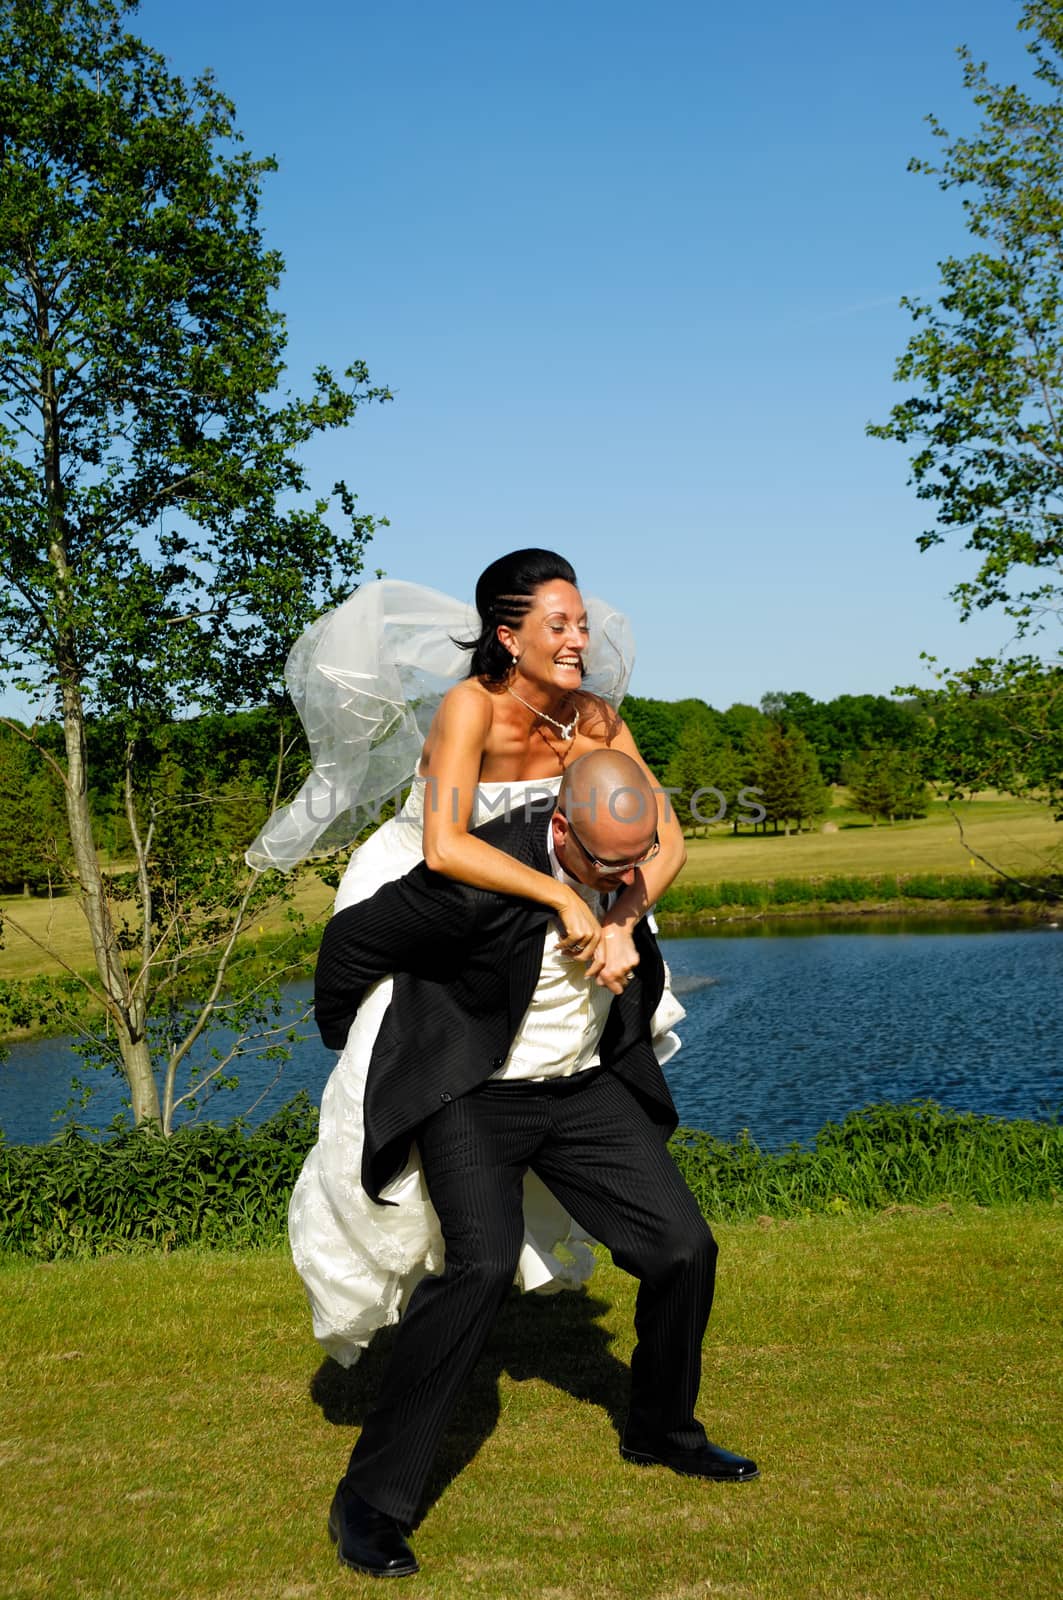 Groom is lifting his bride up in a park.